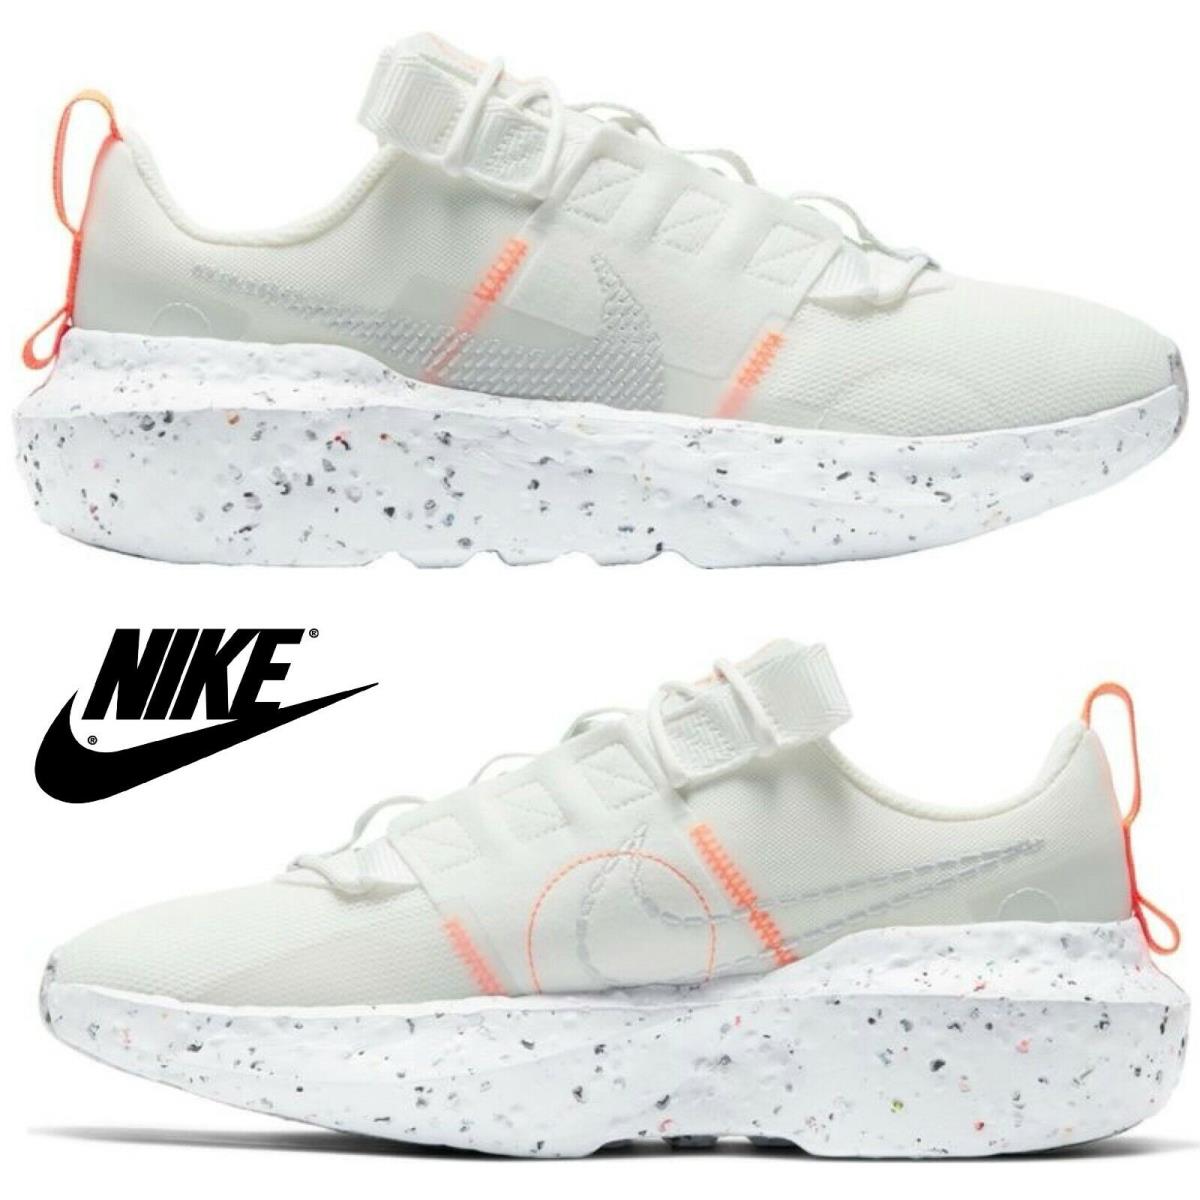 Nike Crater Impact Women s Sneakers Casual Shoes Premium Running Sport White